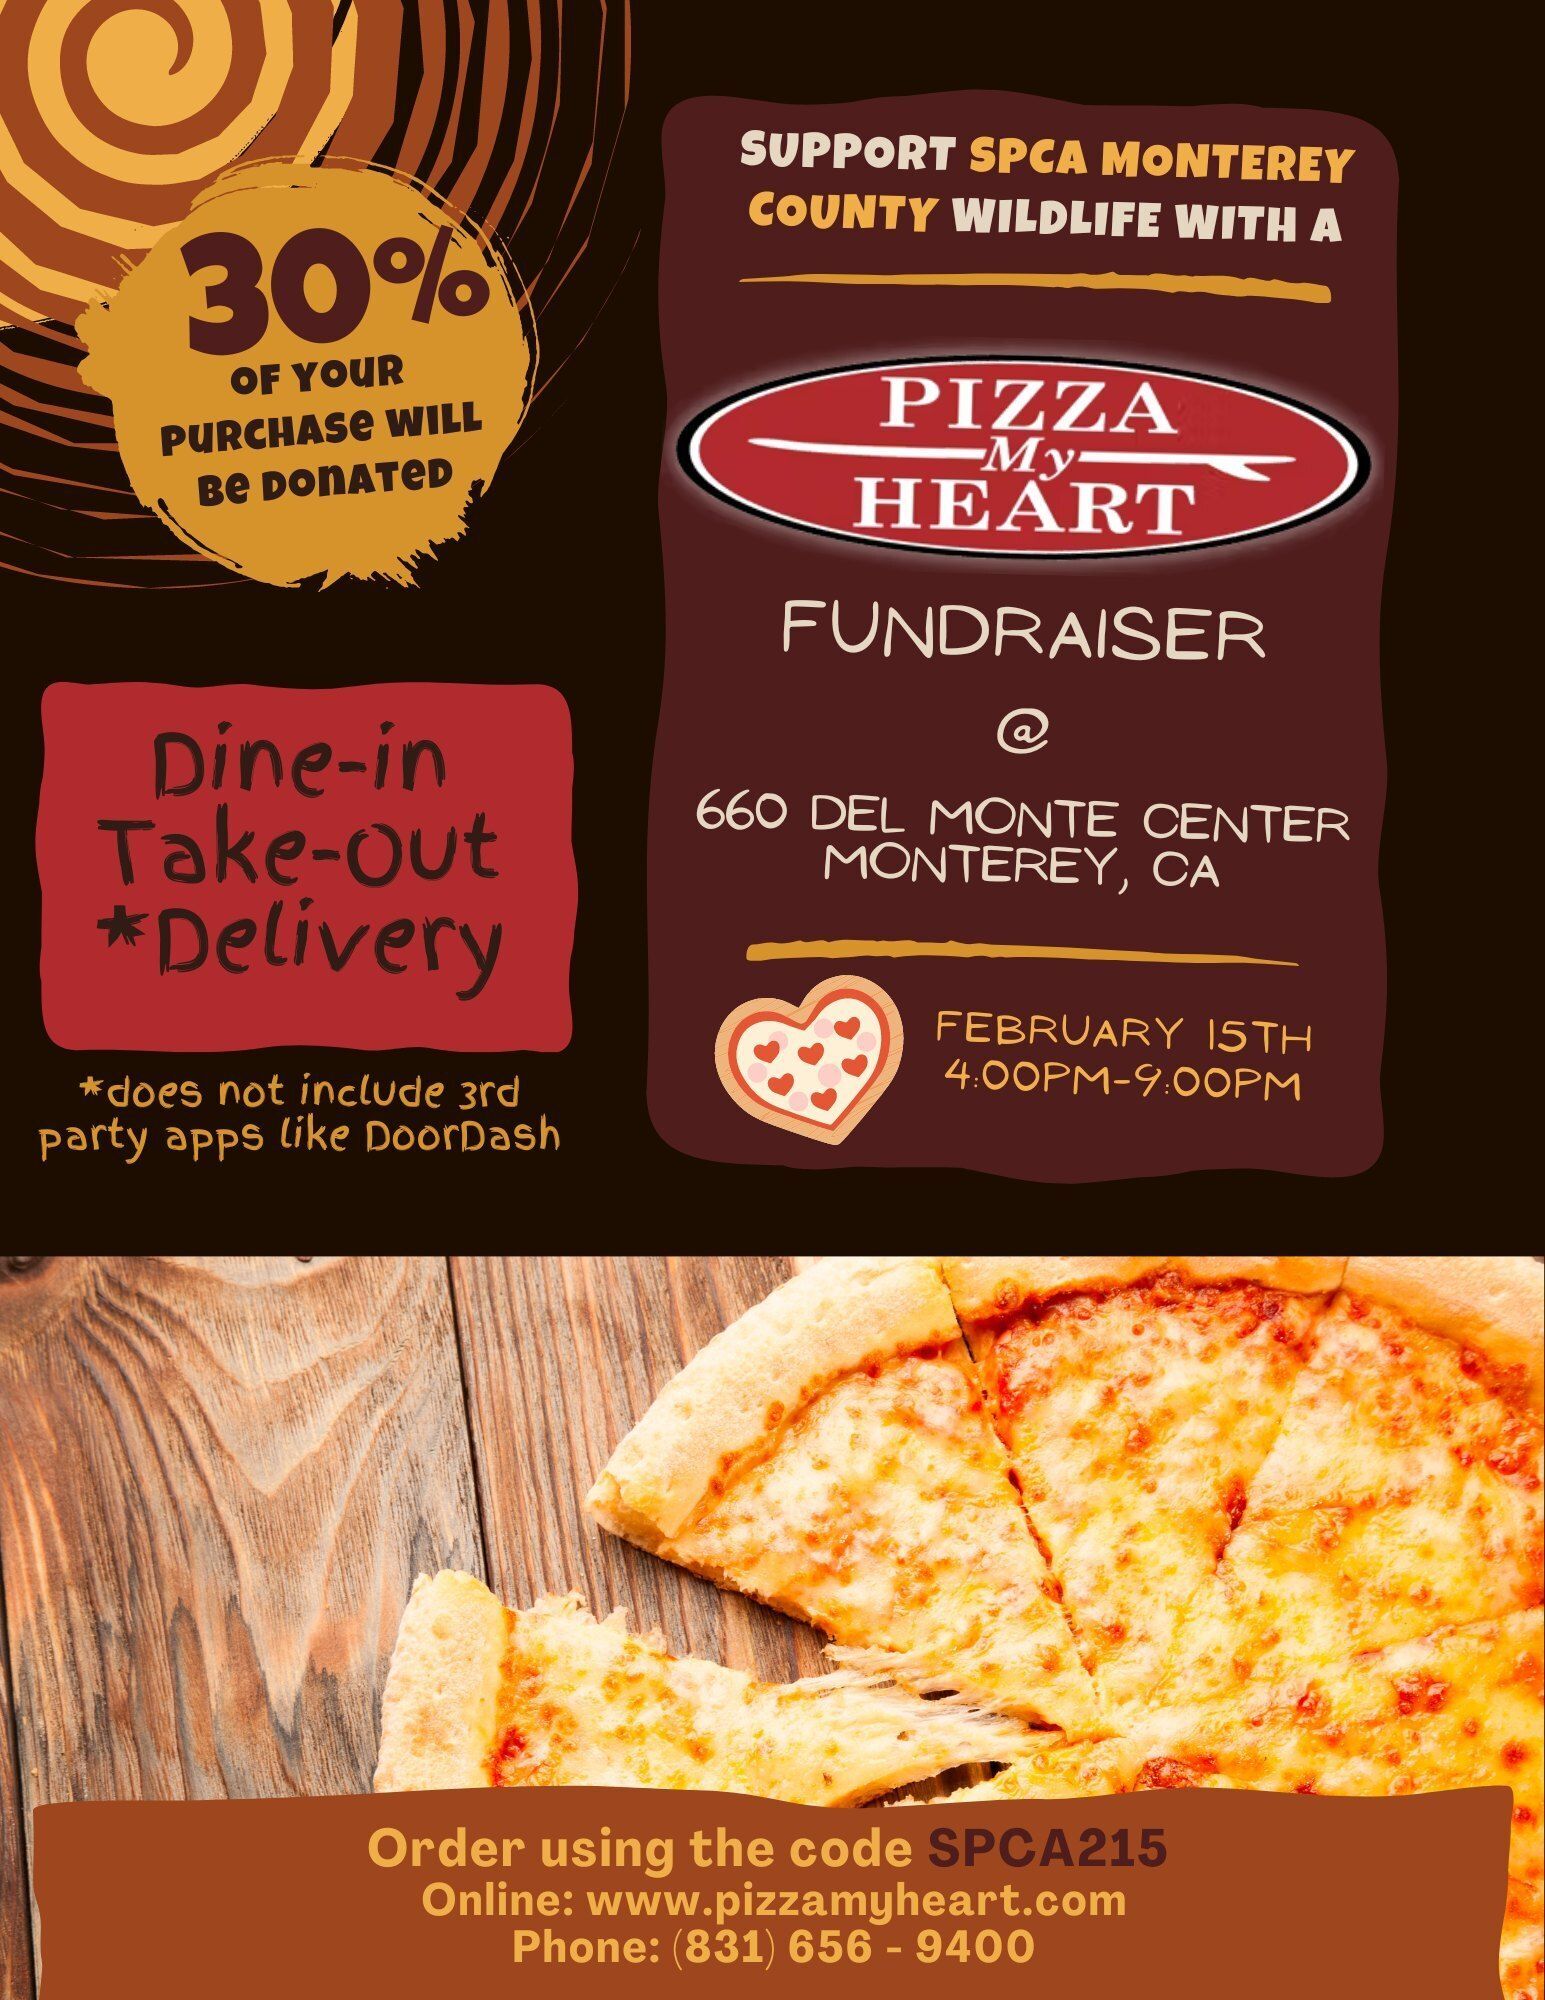 30% of your purchase at Pizza My Heart on Feb 15th (4-9pm) will go to SPCA Monterey County!